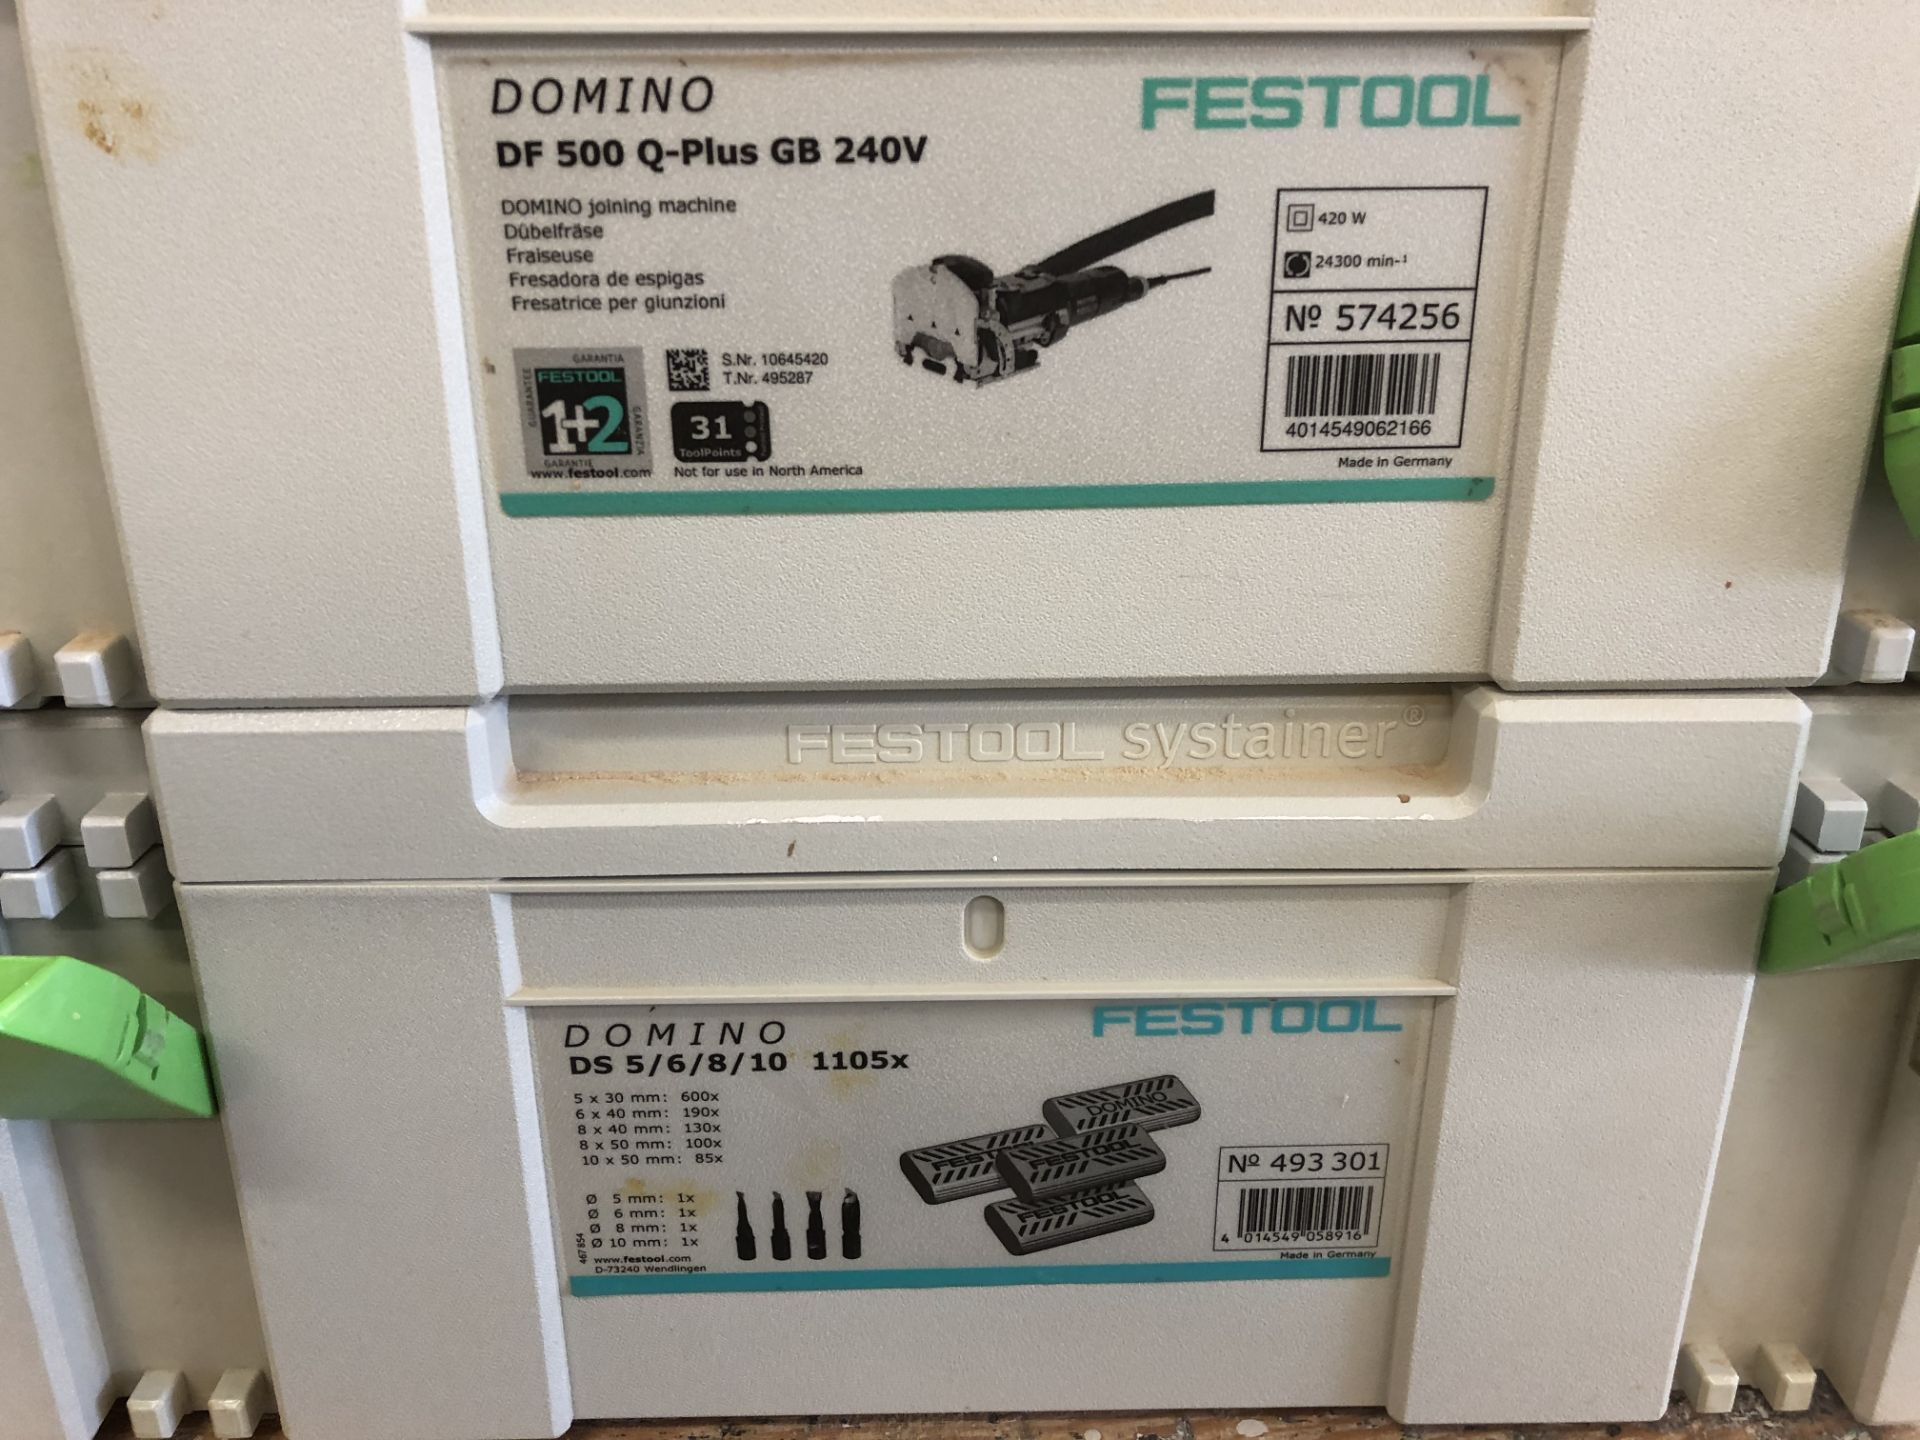 Festool Domino DF 500 Q-Plus GB Joining Machine with Domino Sortiment - Image 3 of 4